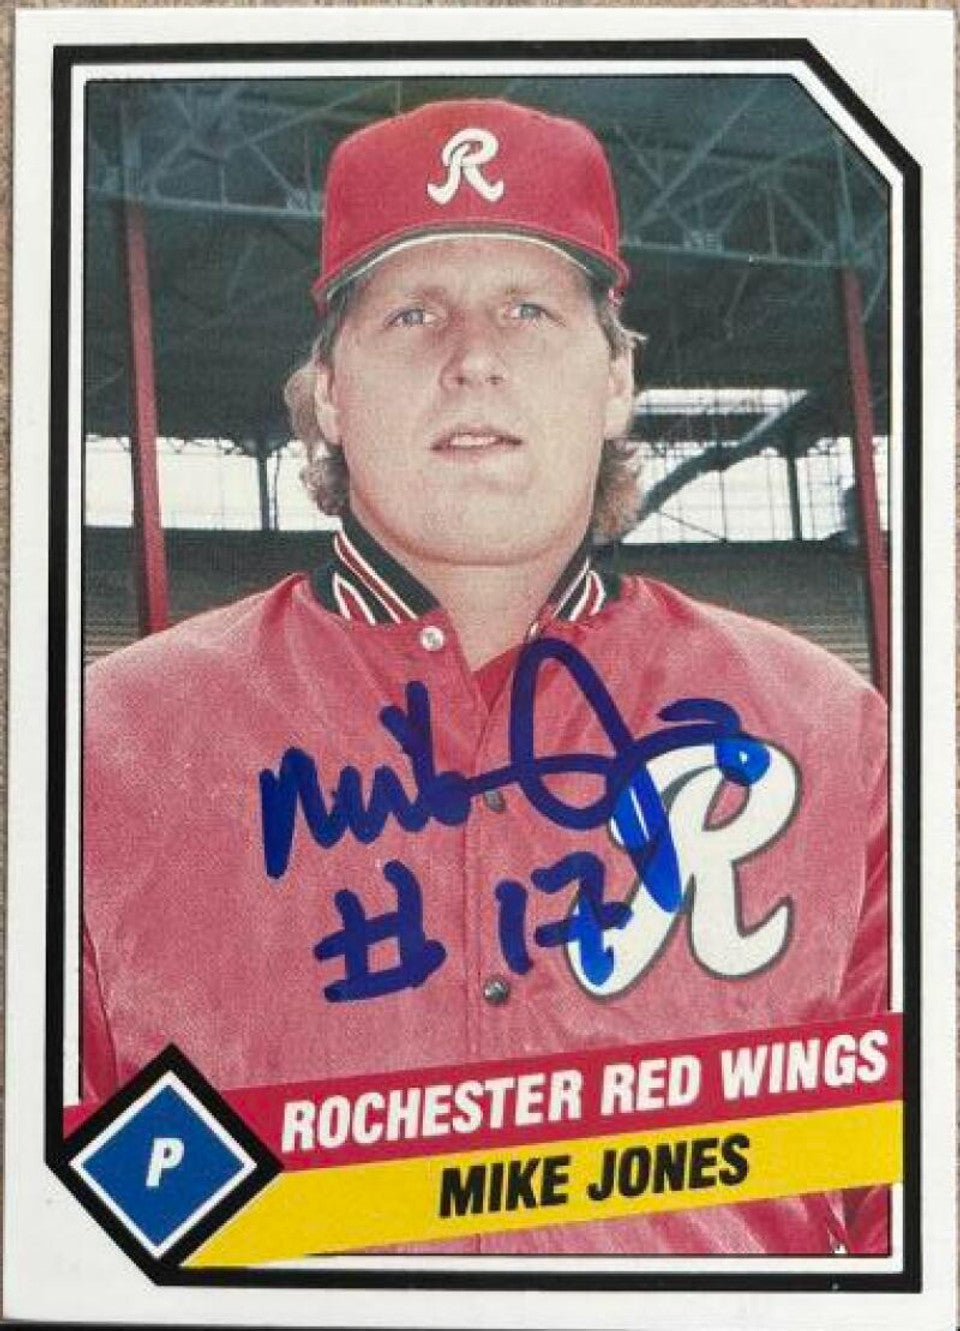 Mike Jones Signed 1989 CMC Baseball Card - Rochester Red Wings